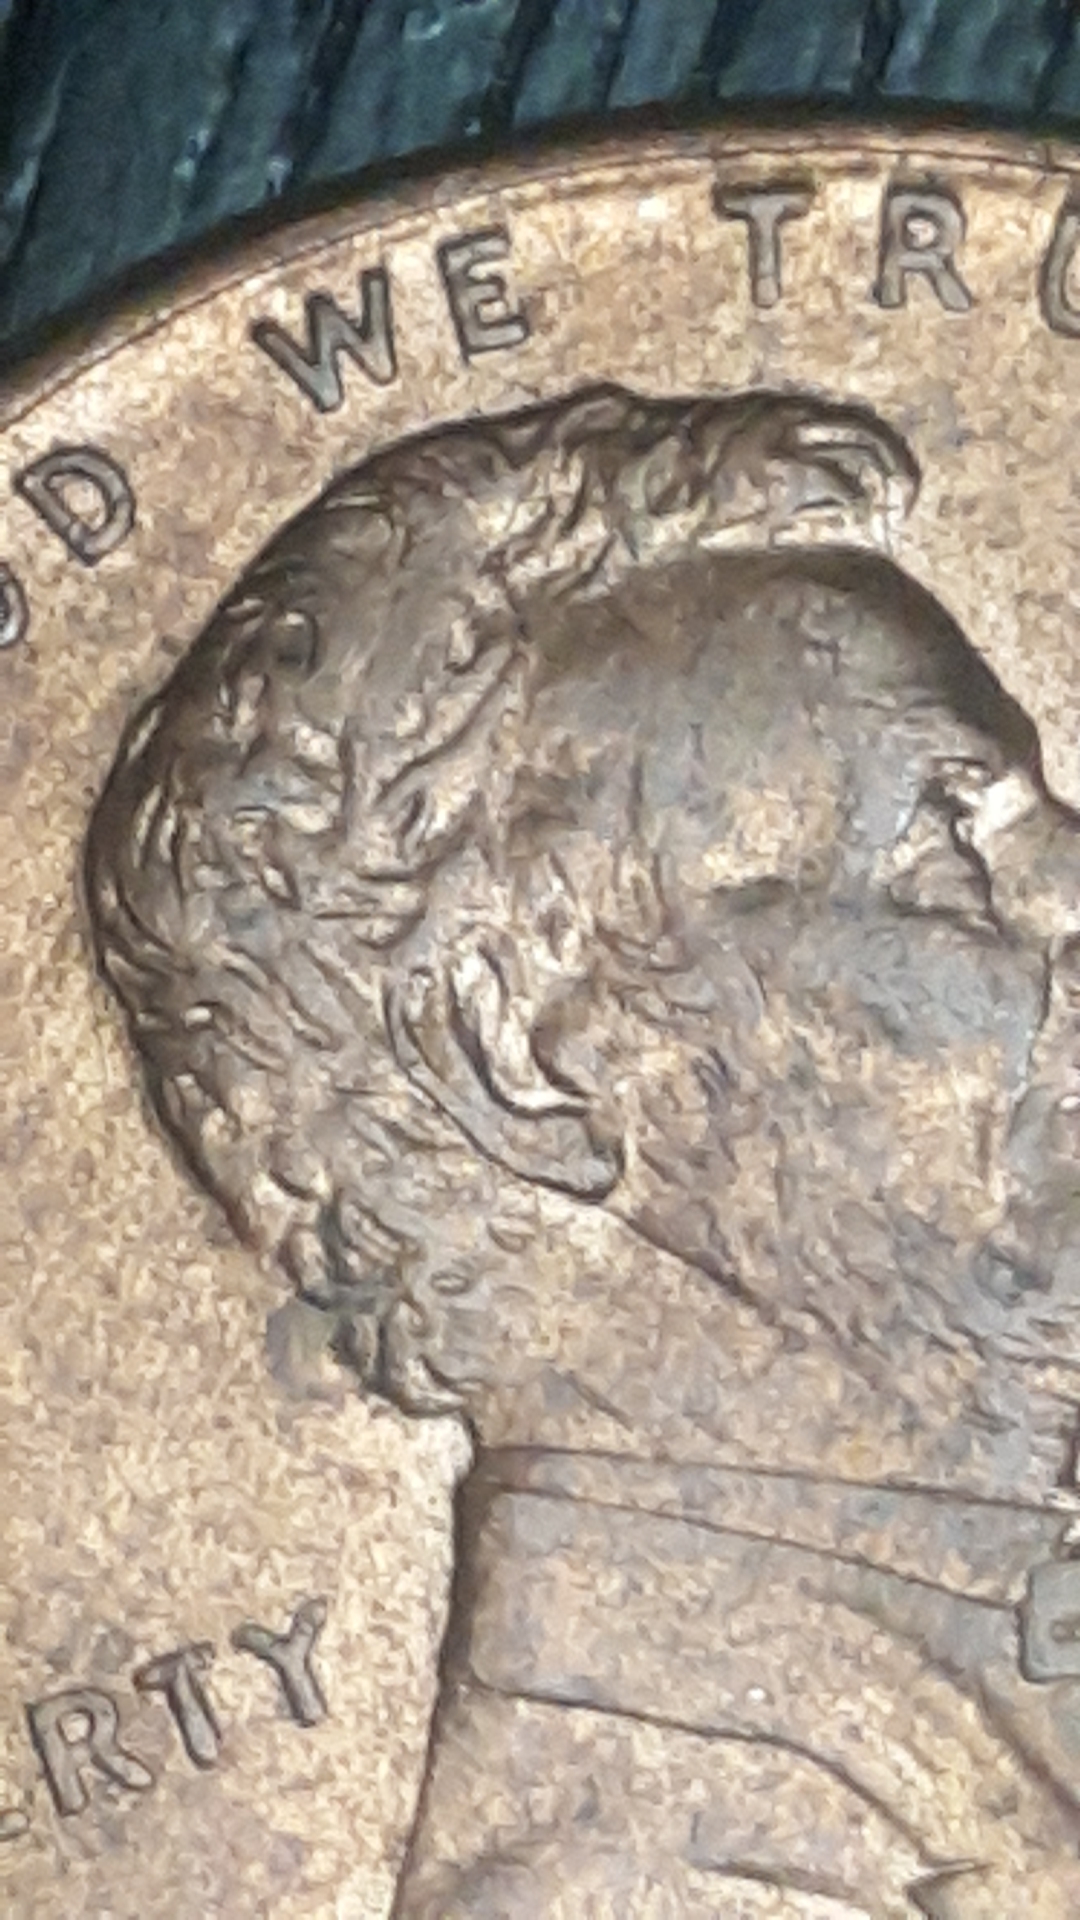 Doubled ear on 1997 Lincoln cent? | Coin Talk